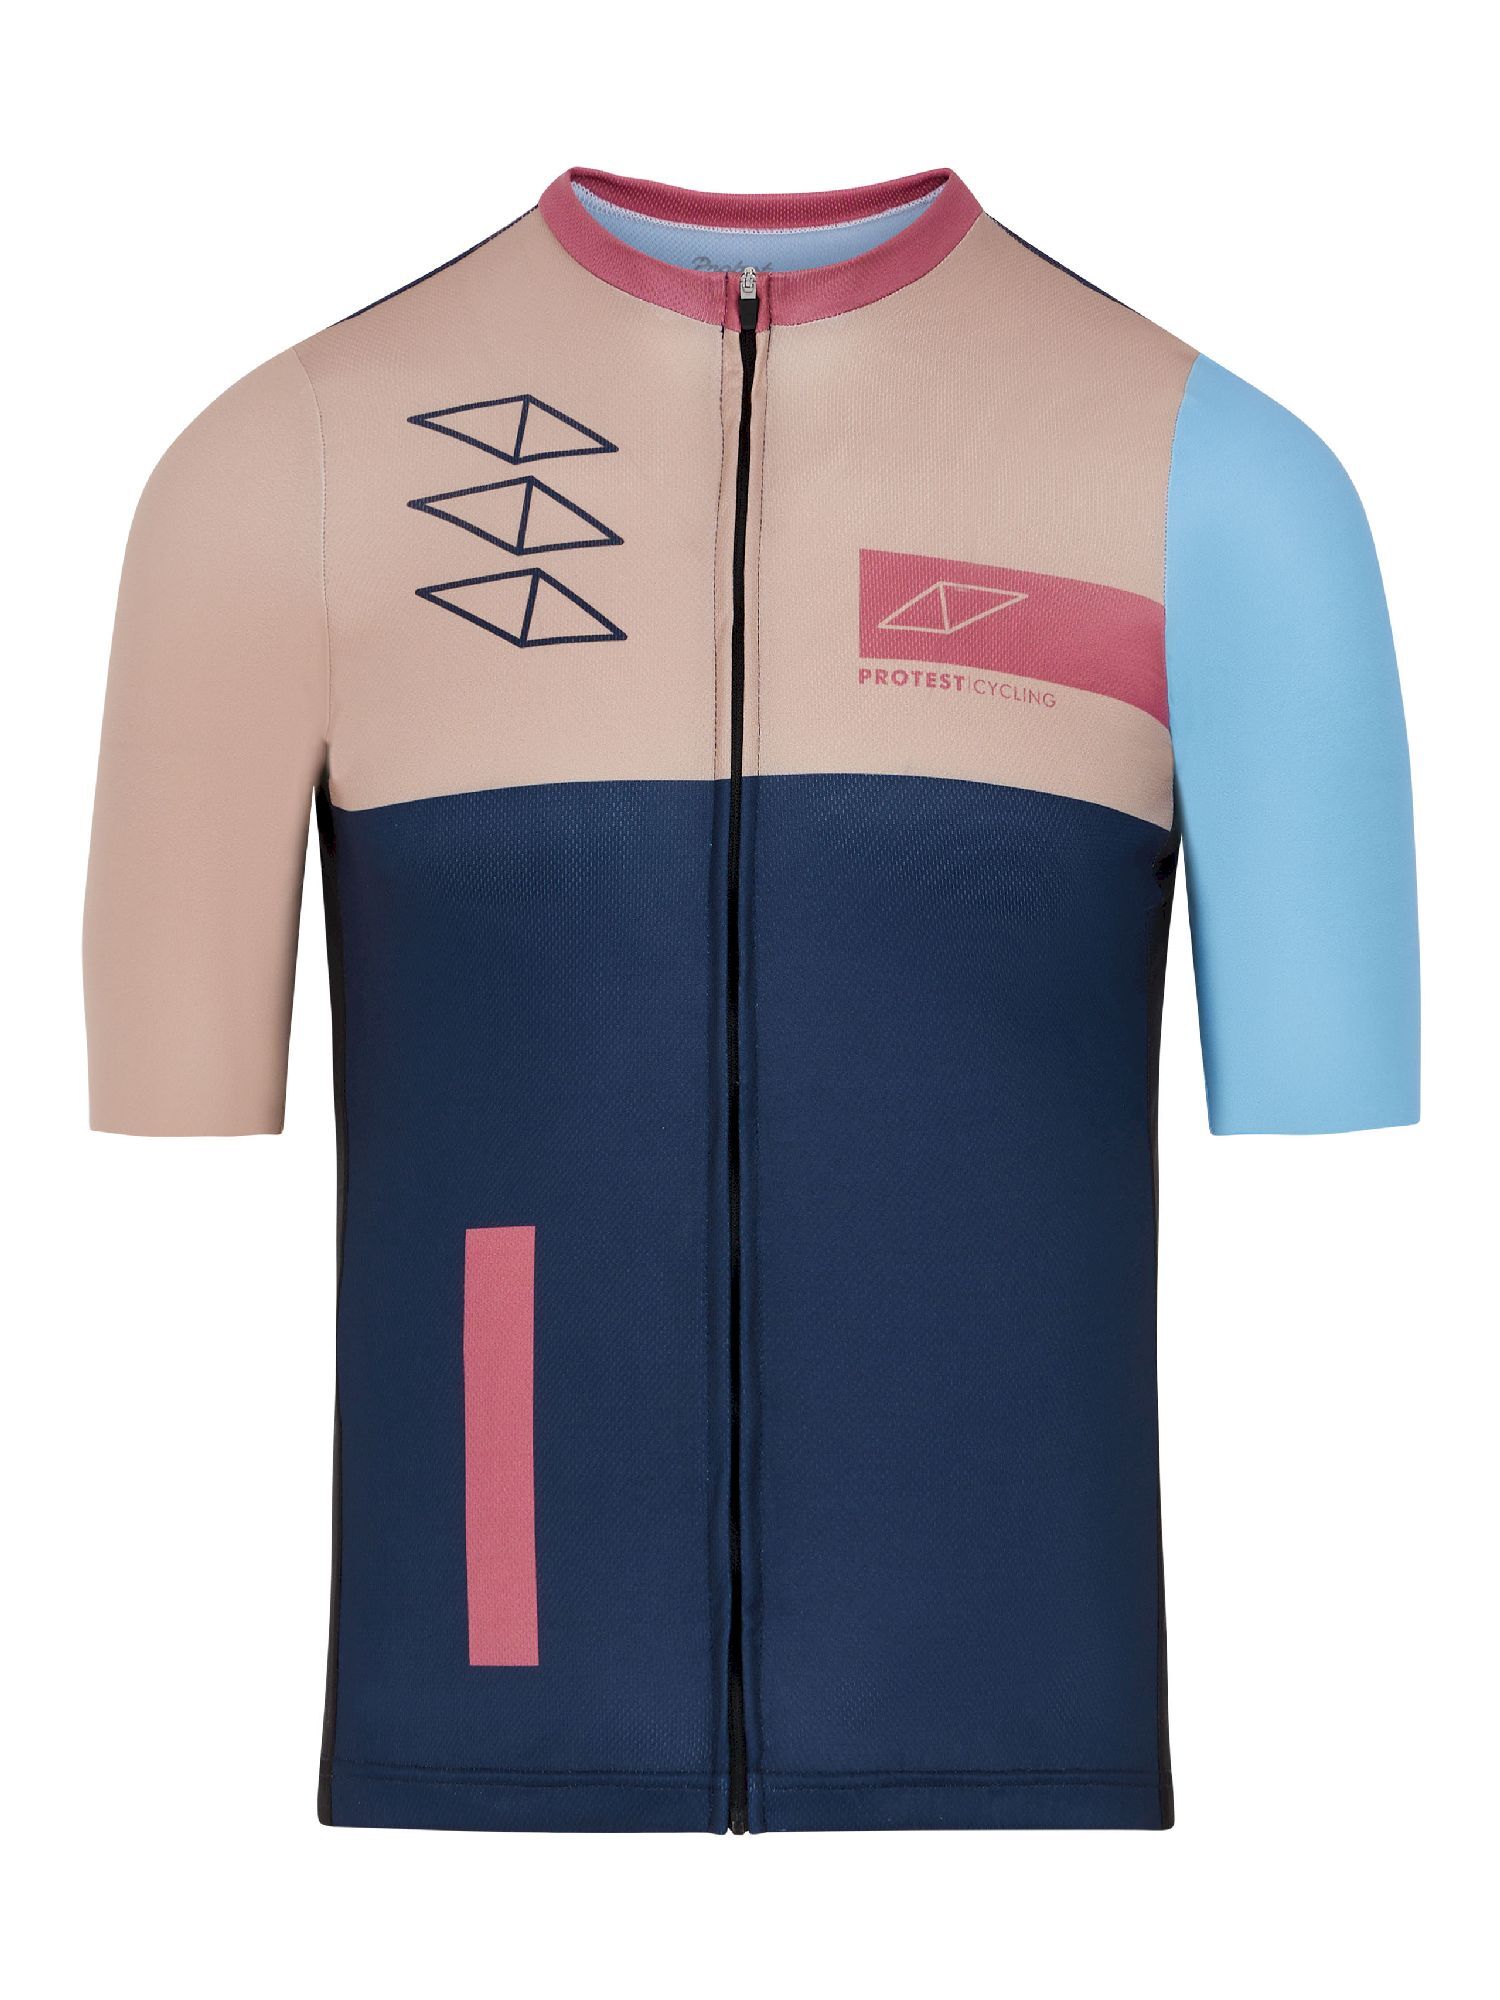 Protest Prtsefs - Maillot ciclismo - Hombre | Hardloop